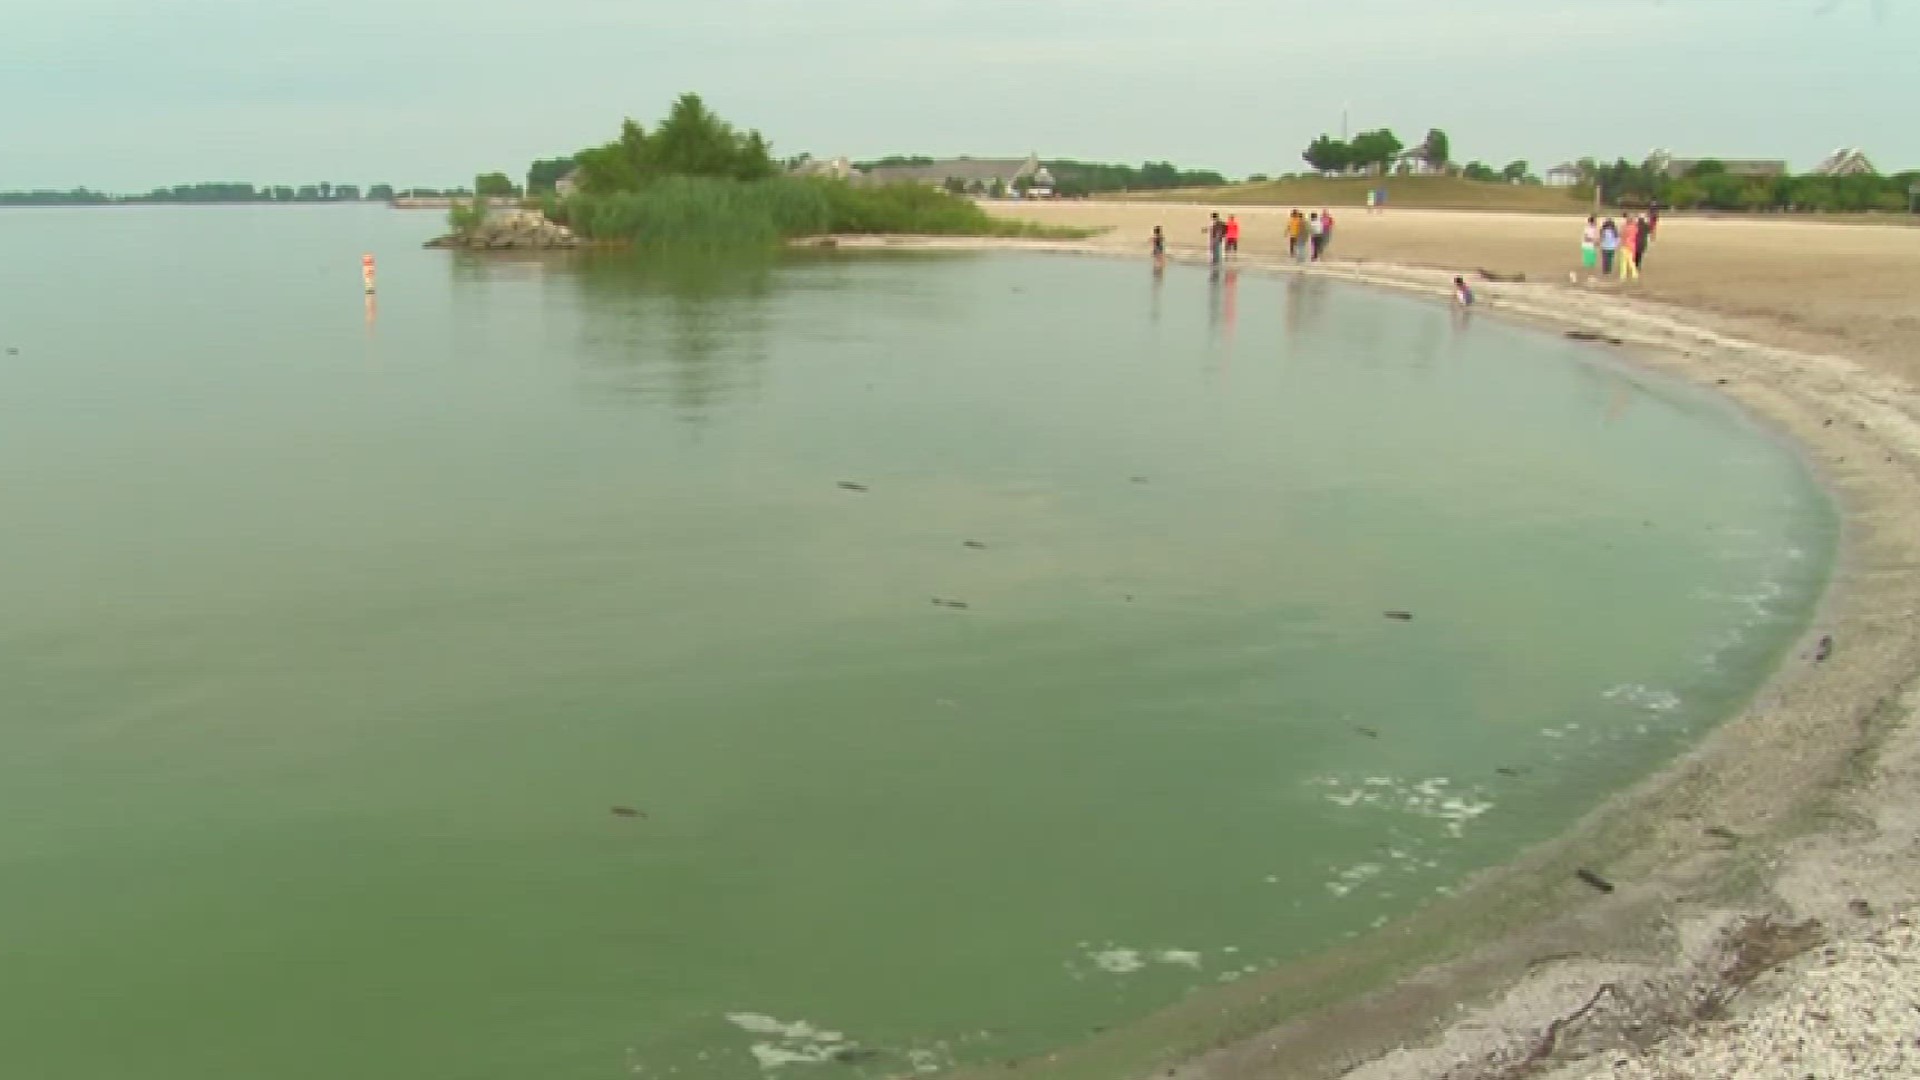 The official forecast will be released closer to the end of June. But until then, here is an early look at what to expect of this year's algal bloom.